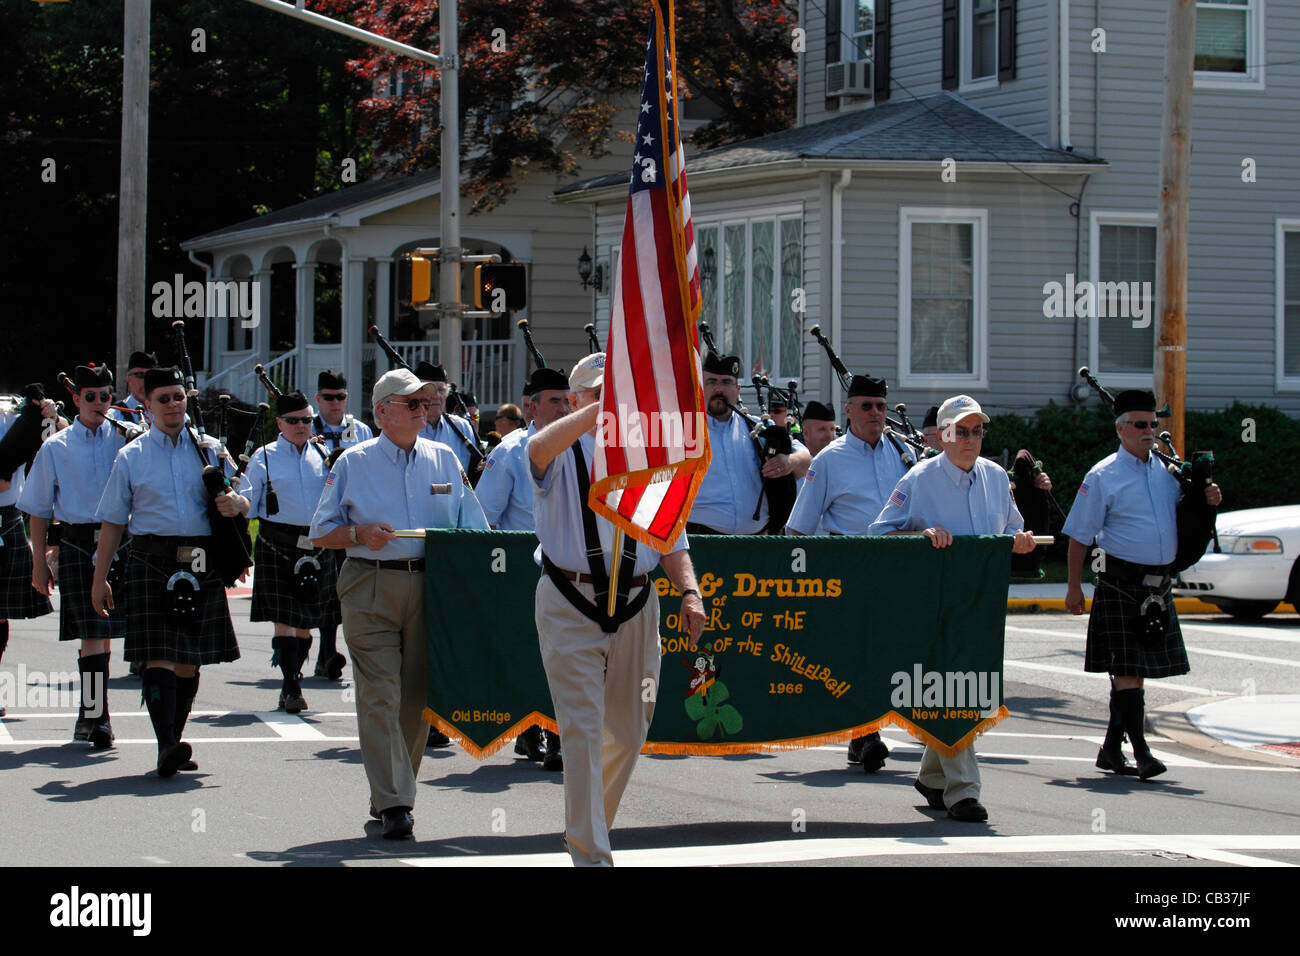 Members of the Friendly Sons of the Shillelagh, an Old Bridge, NJ USA based Drum and Bugle Corps,  marching in a Memorial Day Parade. Stock Photo